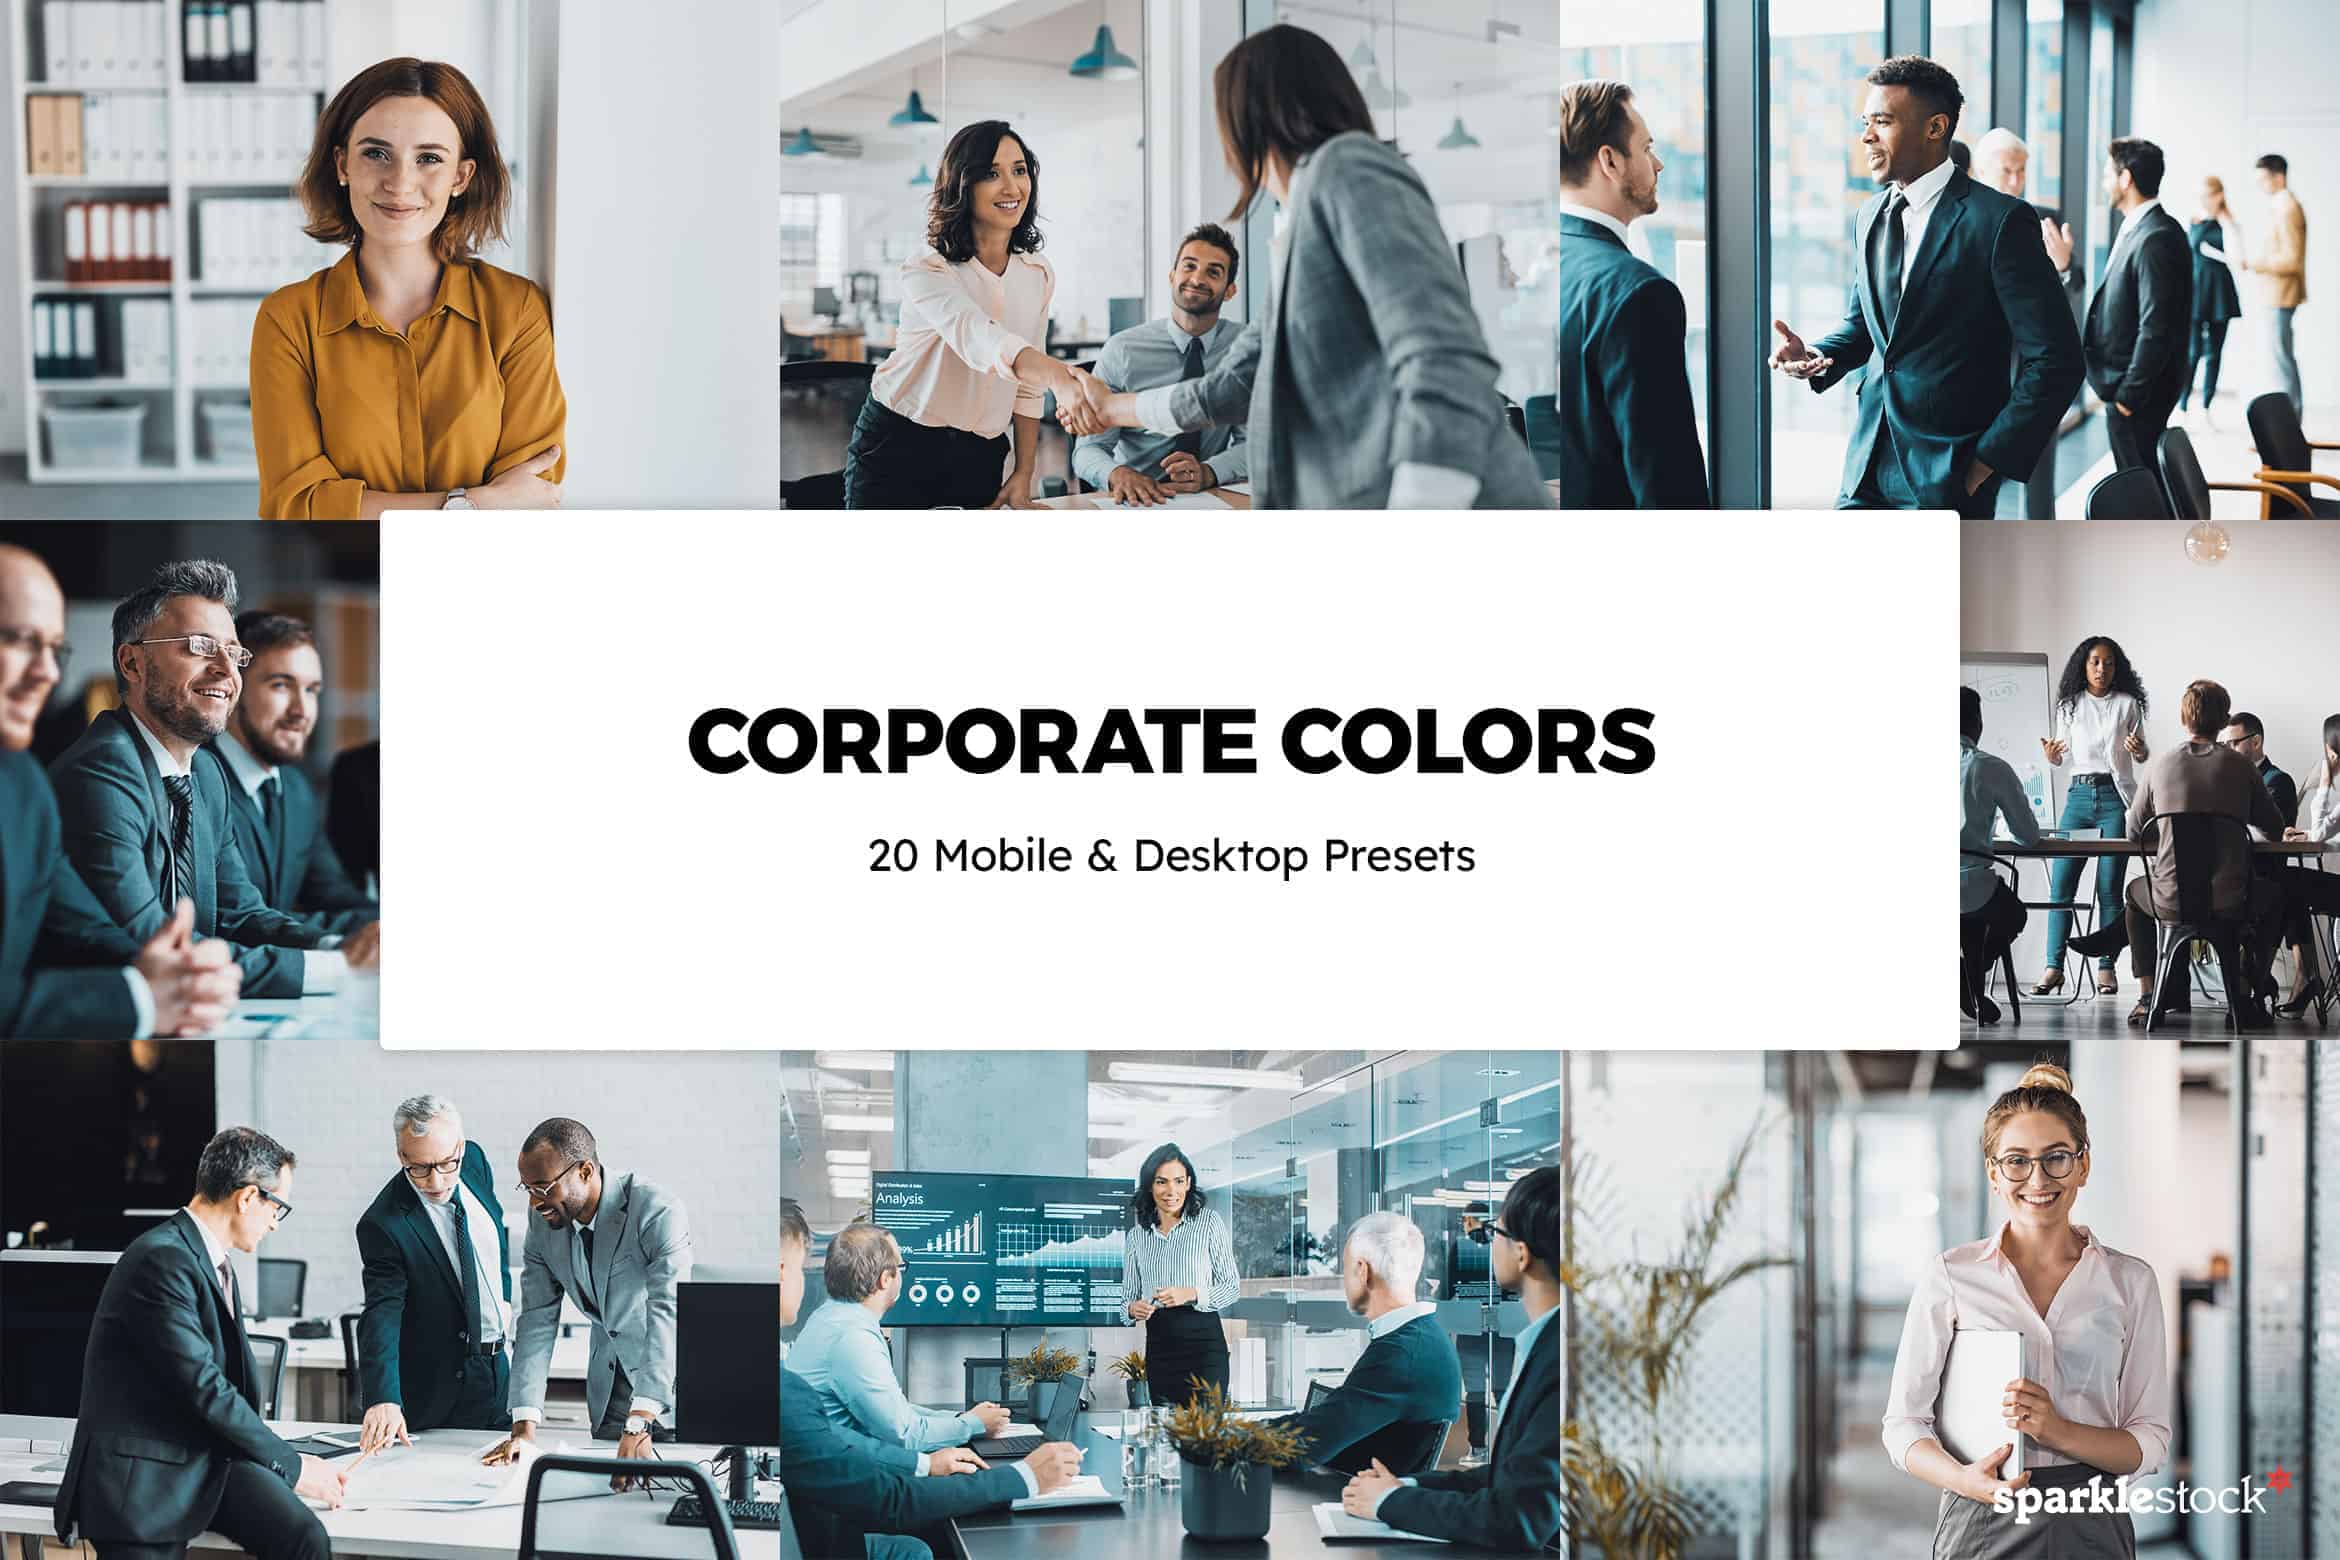 8 Free Corporate Colors Lightroom Presets and LUTs